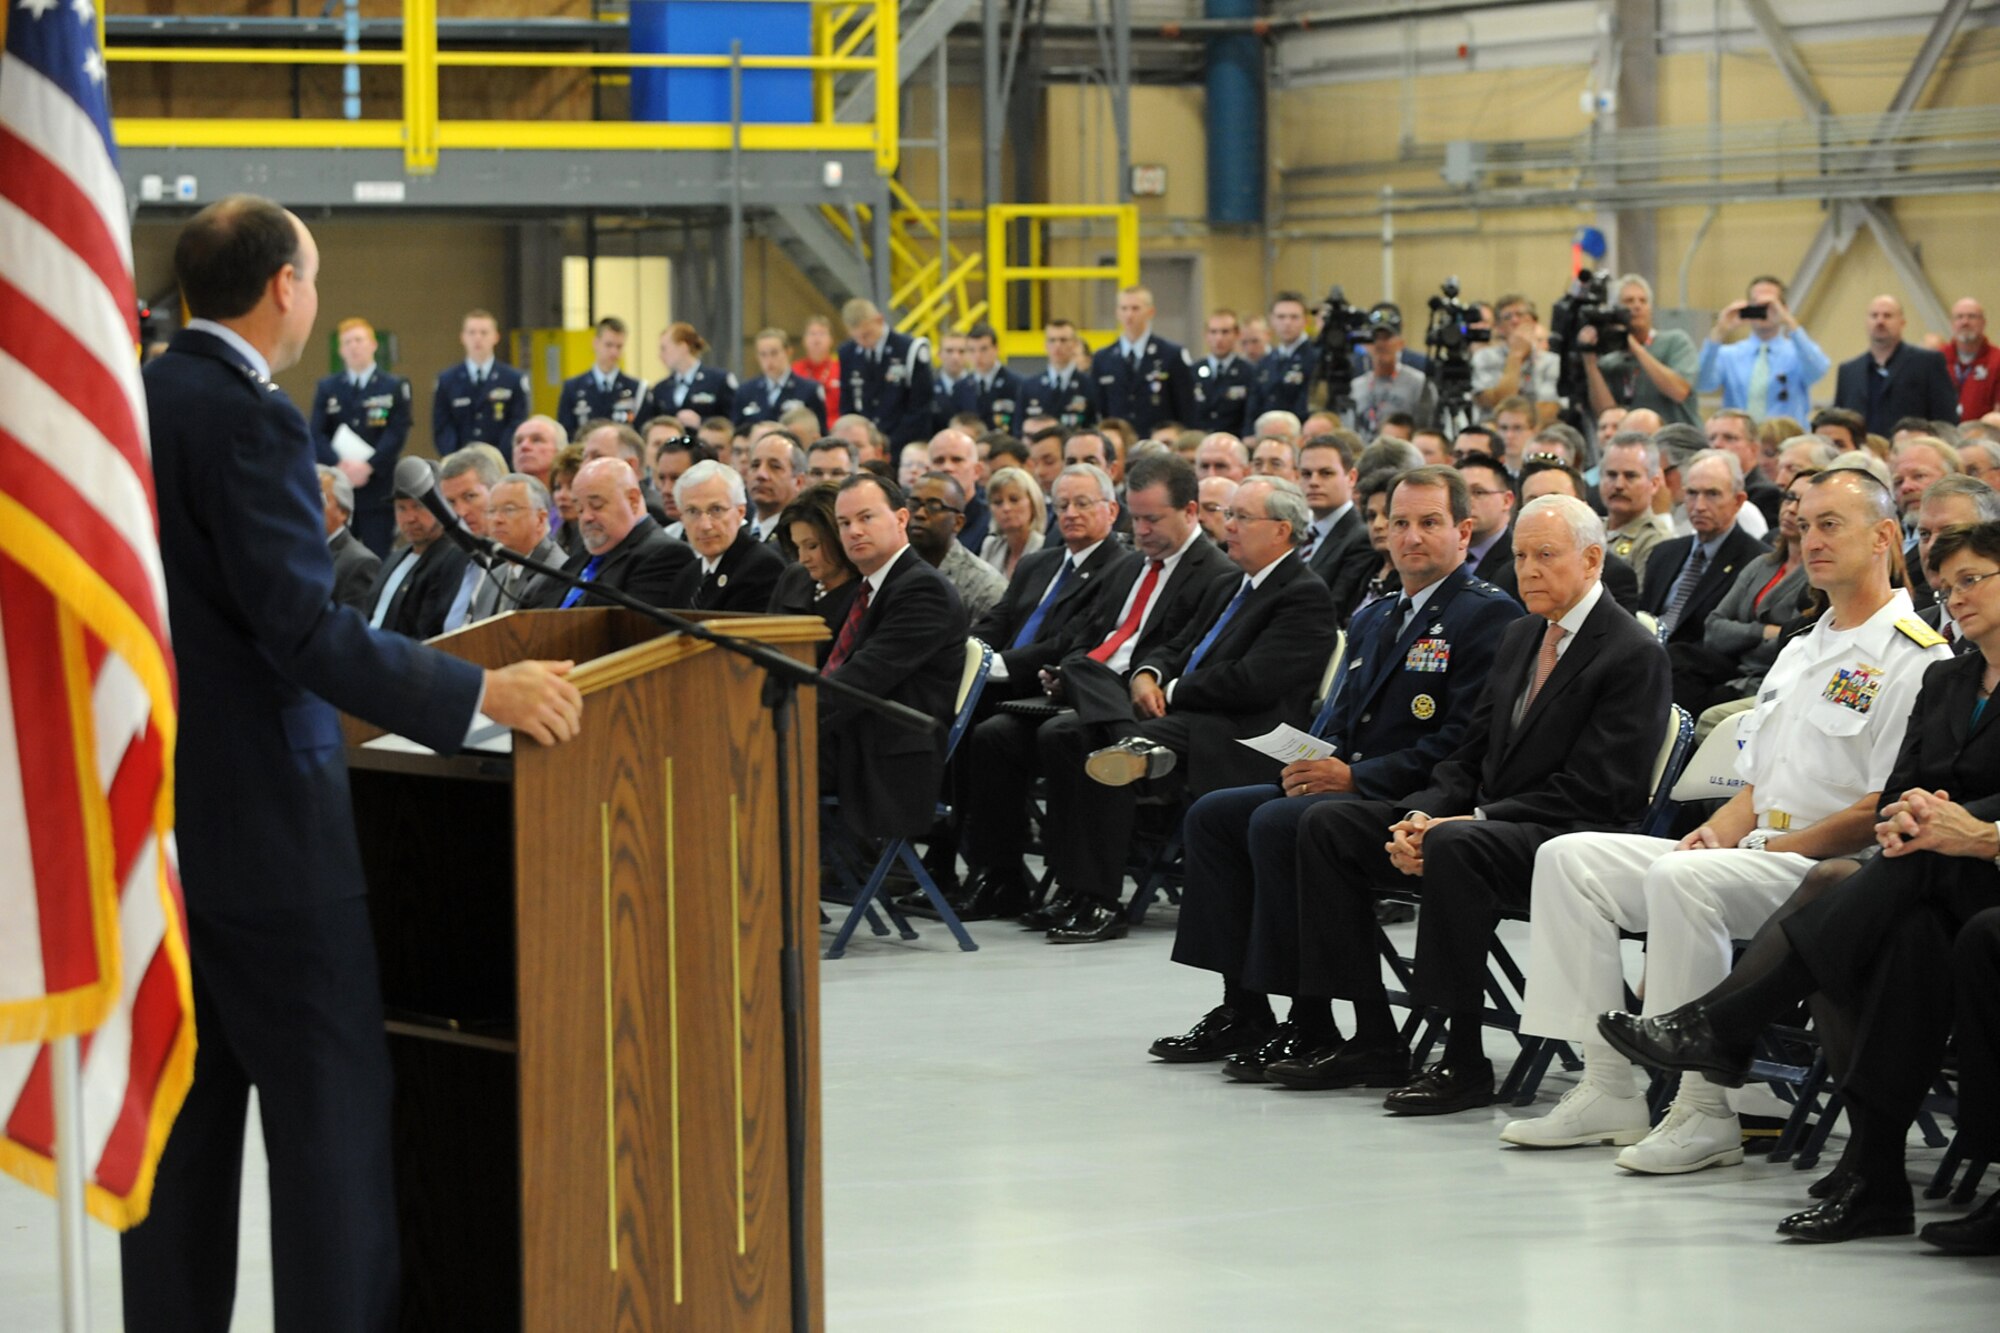 Lt. Gen. Bruce Litchfield, Air Force Sustainment Center commander, speaks during the F-35A Lightning II Joint Strike Fighter commemoration ceremony Sept. 20, 2013, at Hill Air Force Base, Utah. Hill, Lockheed Martin, Utah elected officials and community members gathered for a ceremony to commemorate the beginning of F-35 depot maintenance at the Ogden Air Logistics Complex. The F-35A is a multi-variant, multi-role, fifth generation fighter, and will undergo organic depot modification work at Hill AFB. (U.S. Air Force photo/Alex R. Lloyd)